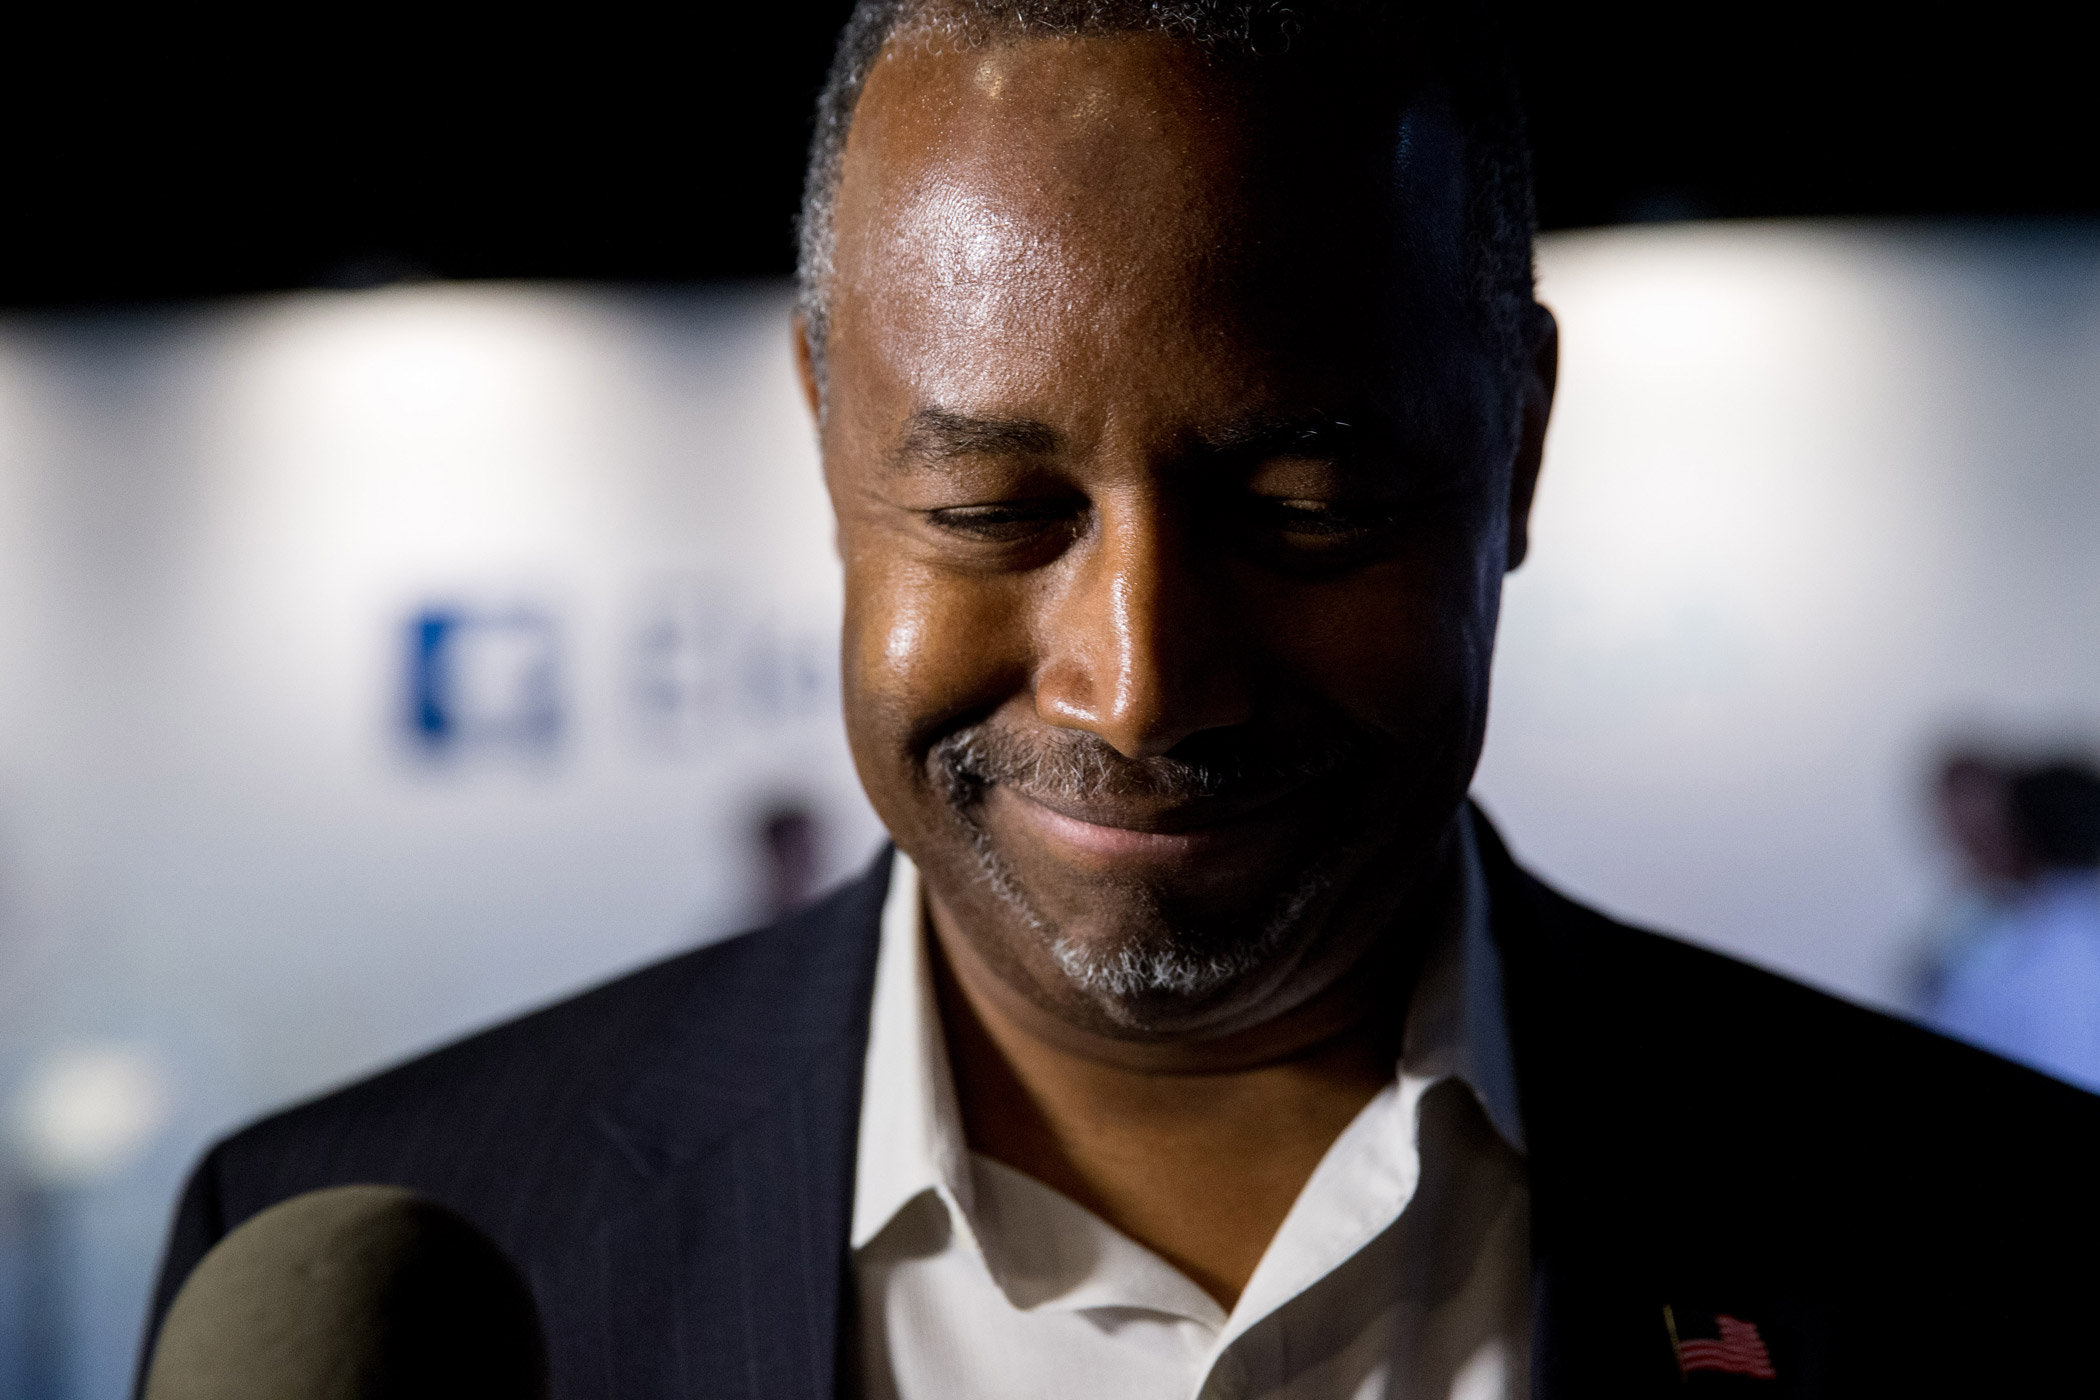 Republican presidential candidate and retired neurosurgeon Ben Carson speaks to reporters in Cleveland, Ohio on Thursday, Aug. 6, 2015, before the first Republican presidential debate. (Andrew Harnik—AP)